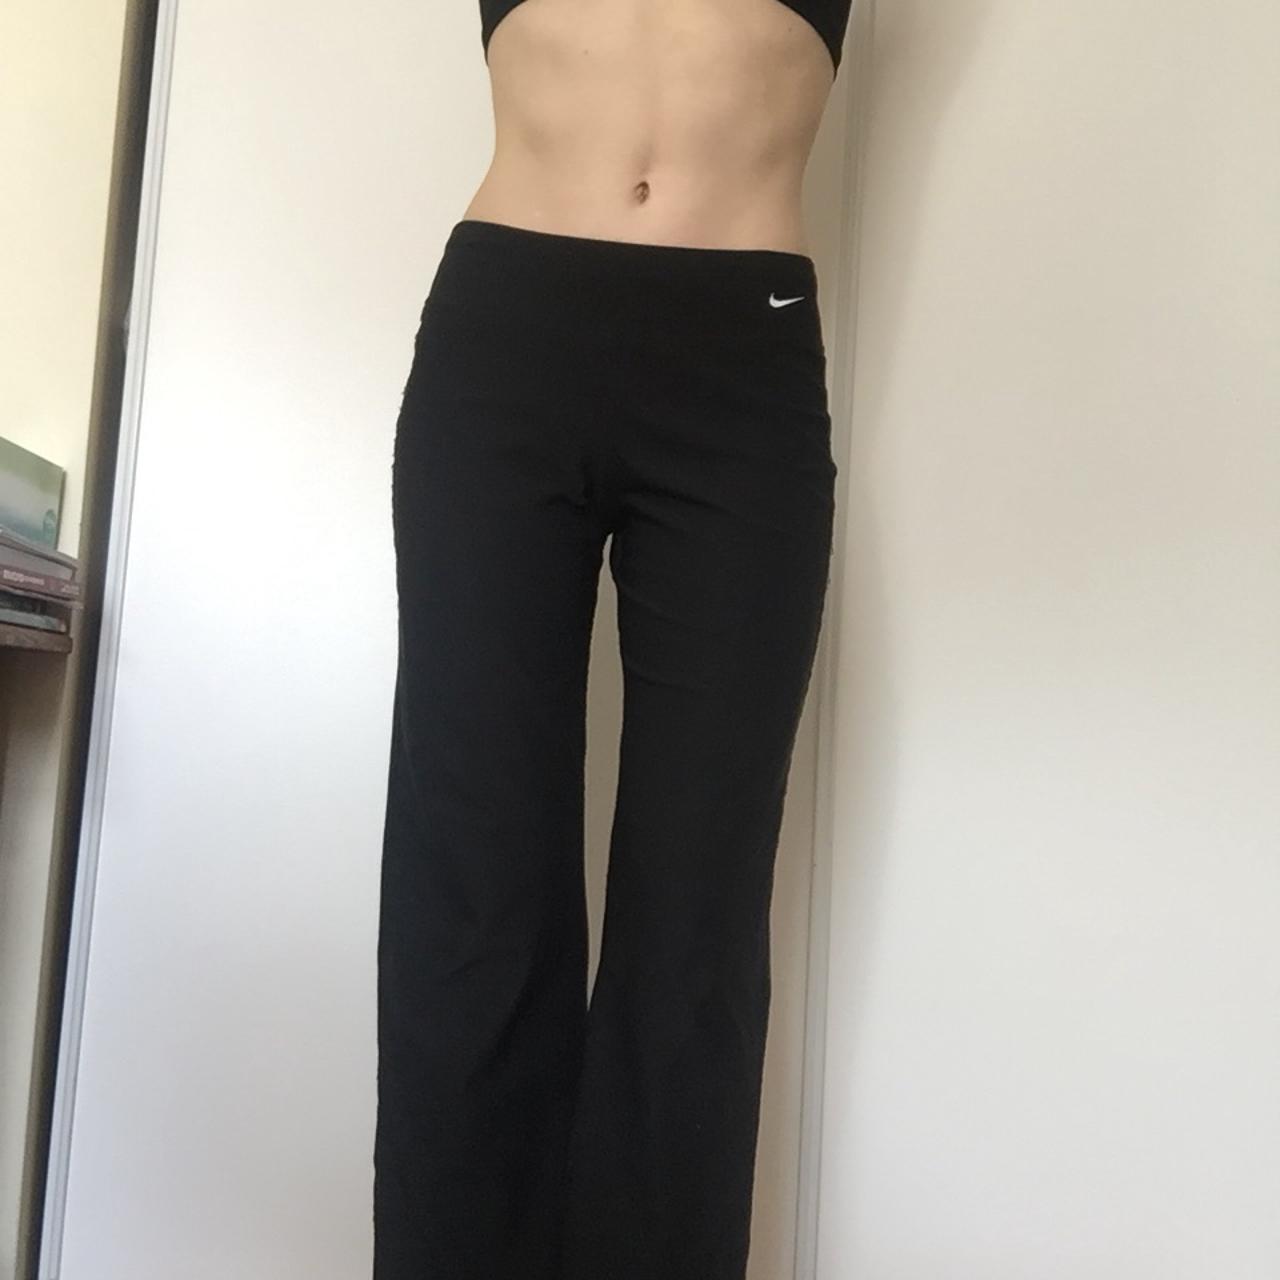 NIKE FLARE YOGA PANTS , would fit sizes small-large